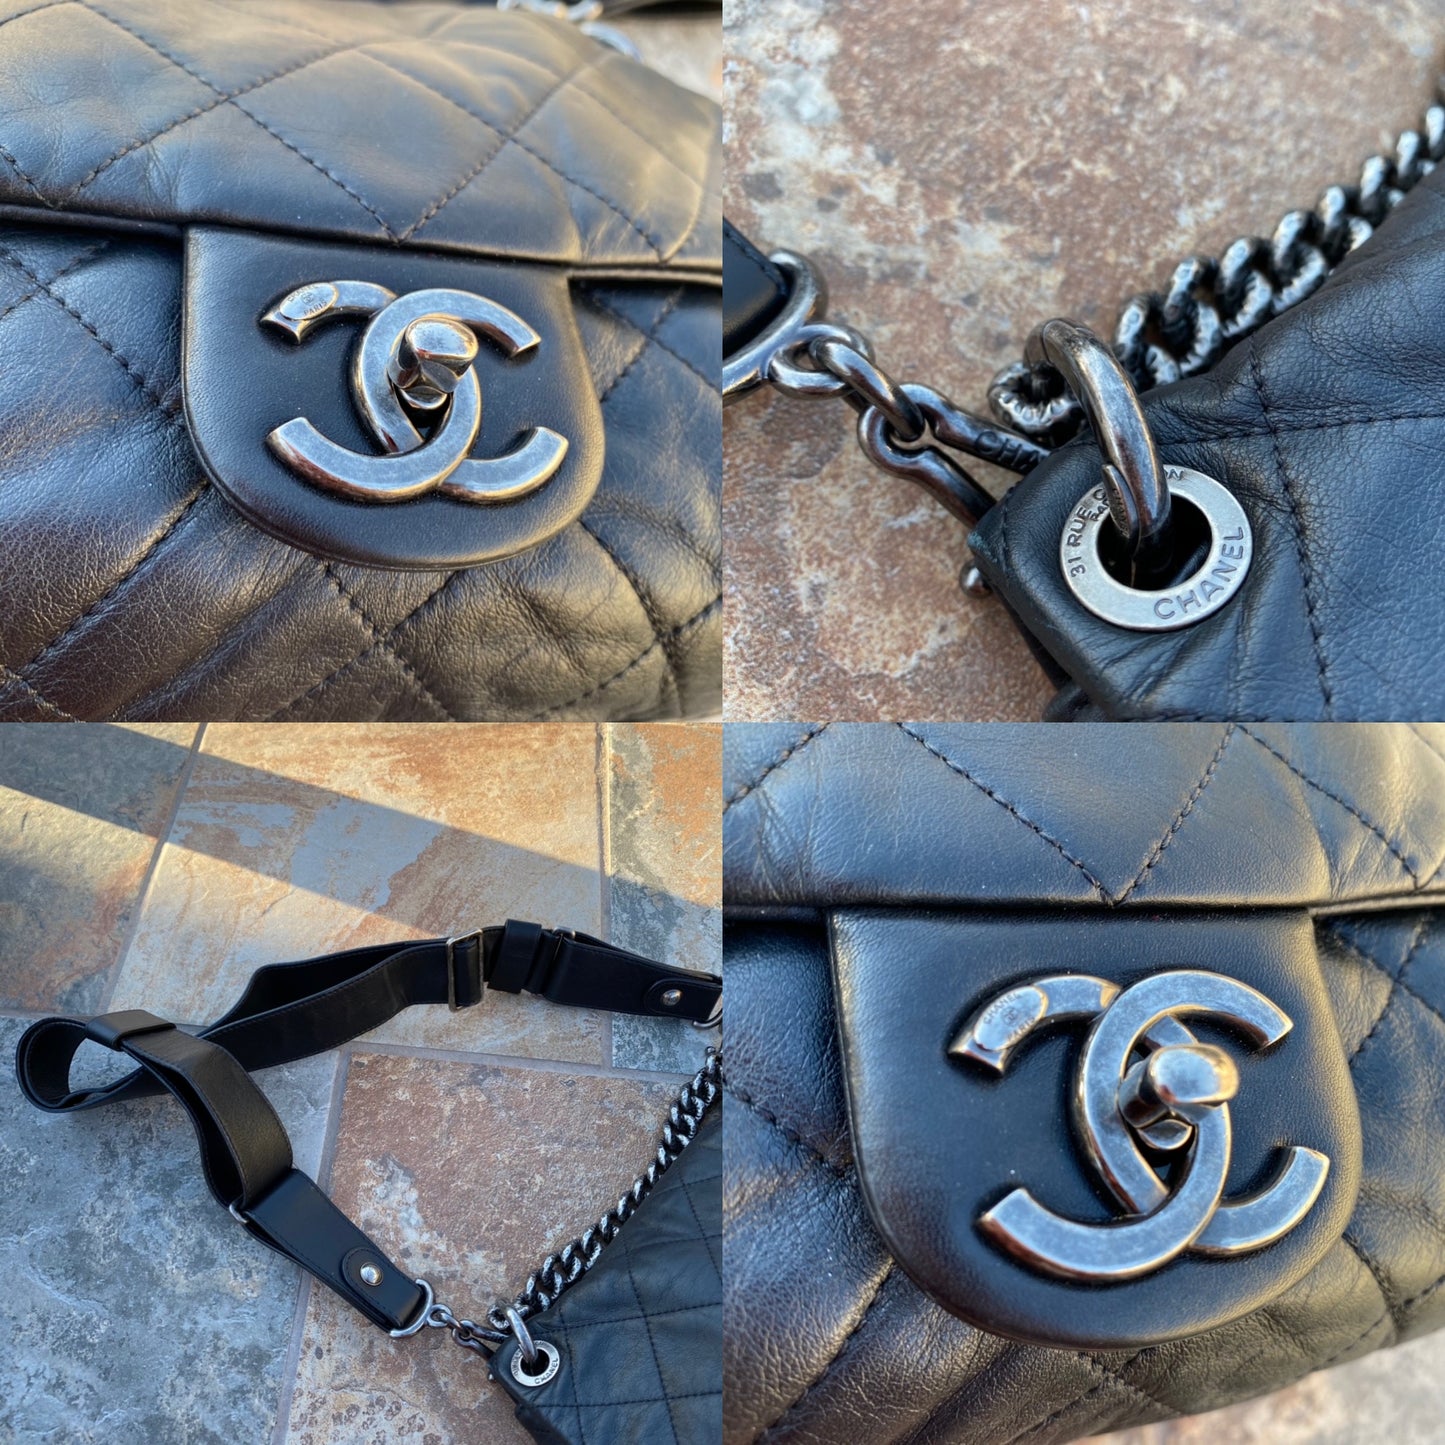 Chanel Quilted Calfskin Leather Coco Pleats Bag